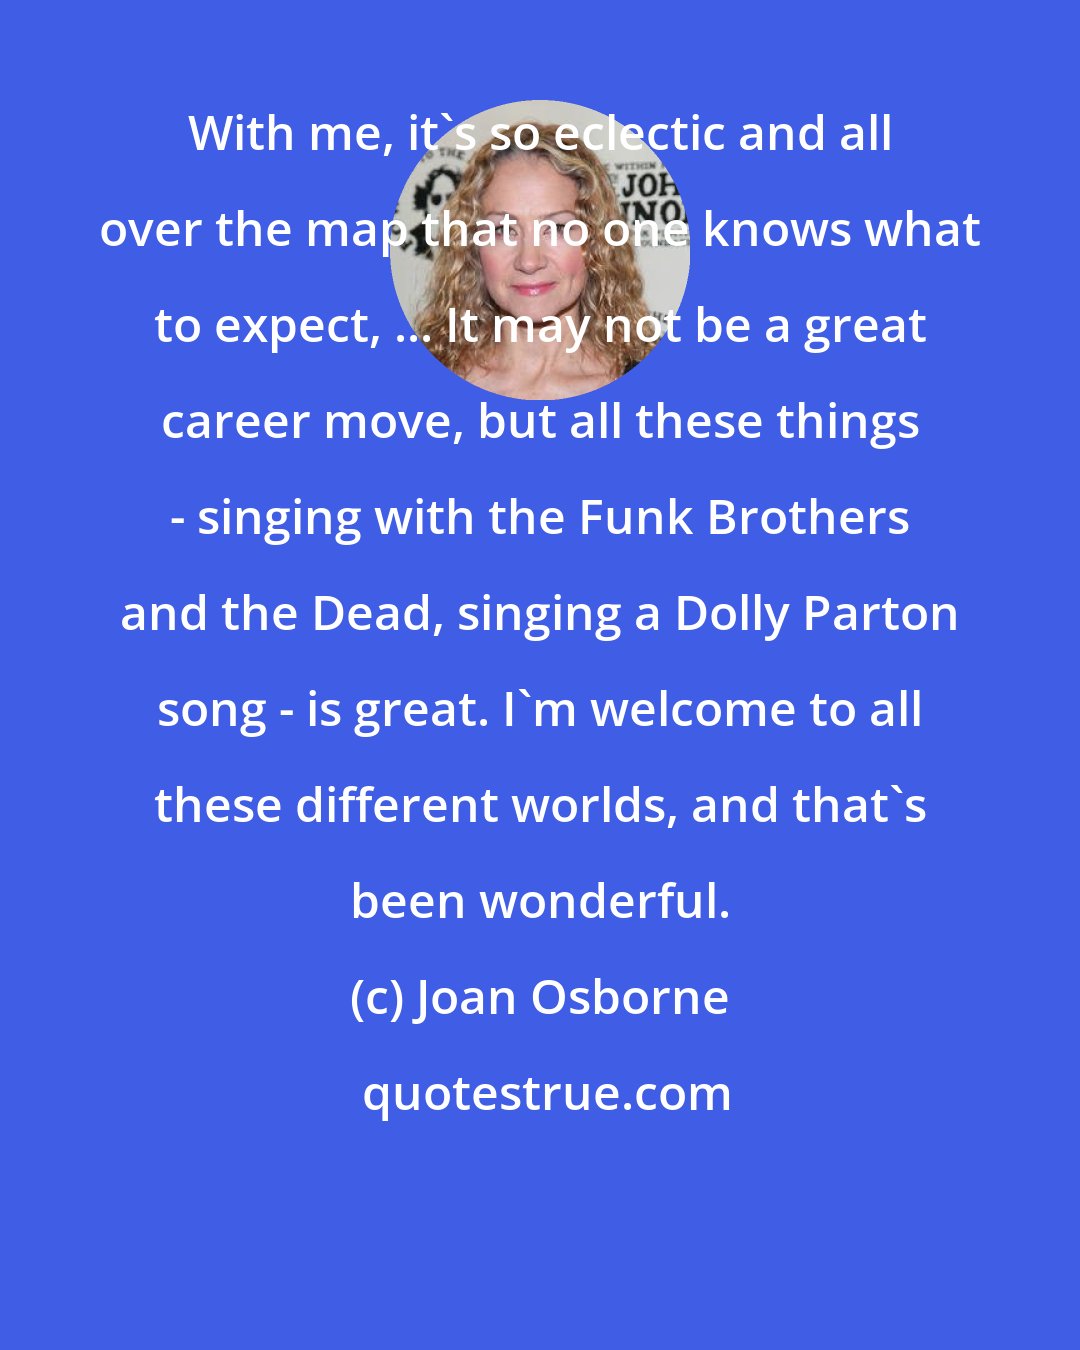 Joan Osborne: With me, it's so eclectic and all over the map that no one knows what to expect, ... It may not be a great career move, but all these things - singing with the Funk Brothers and the Dead, singing a Dolly Parton song - is great. I'm welcome to all these different worlds, and that's been wonderful.